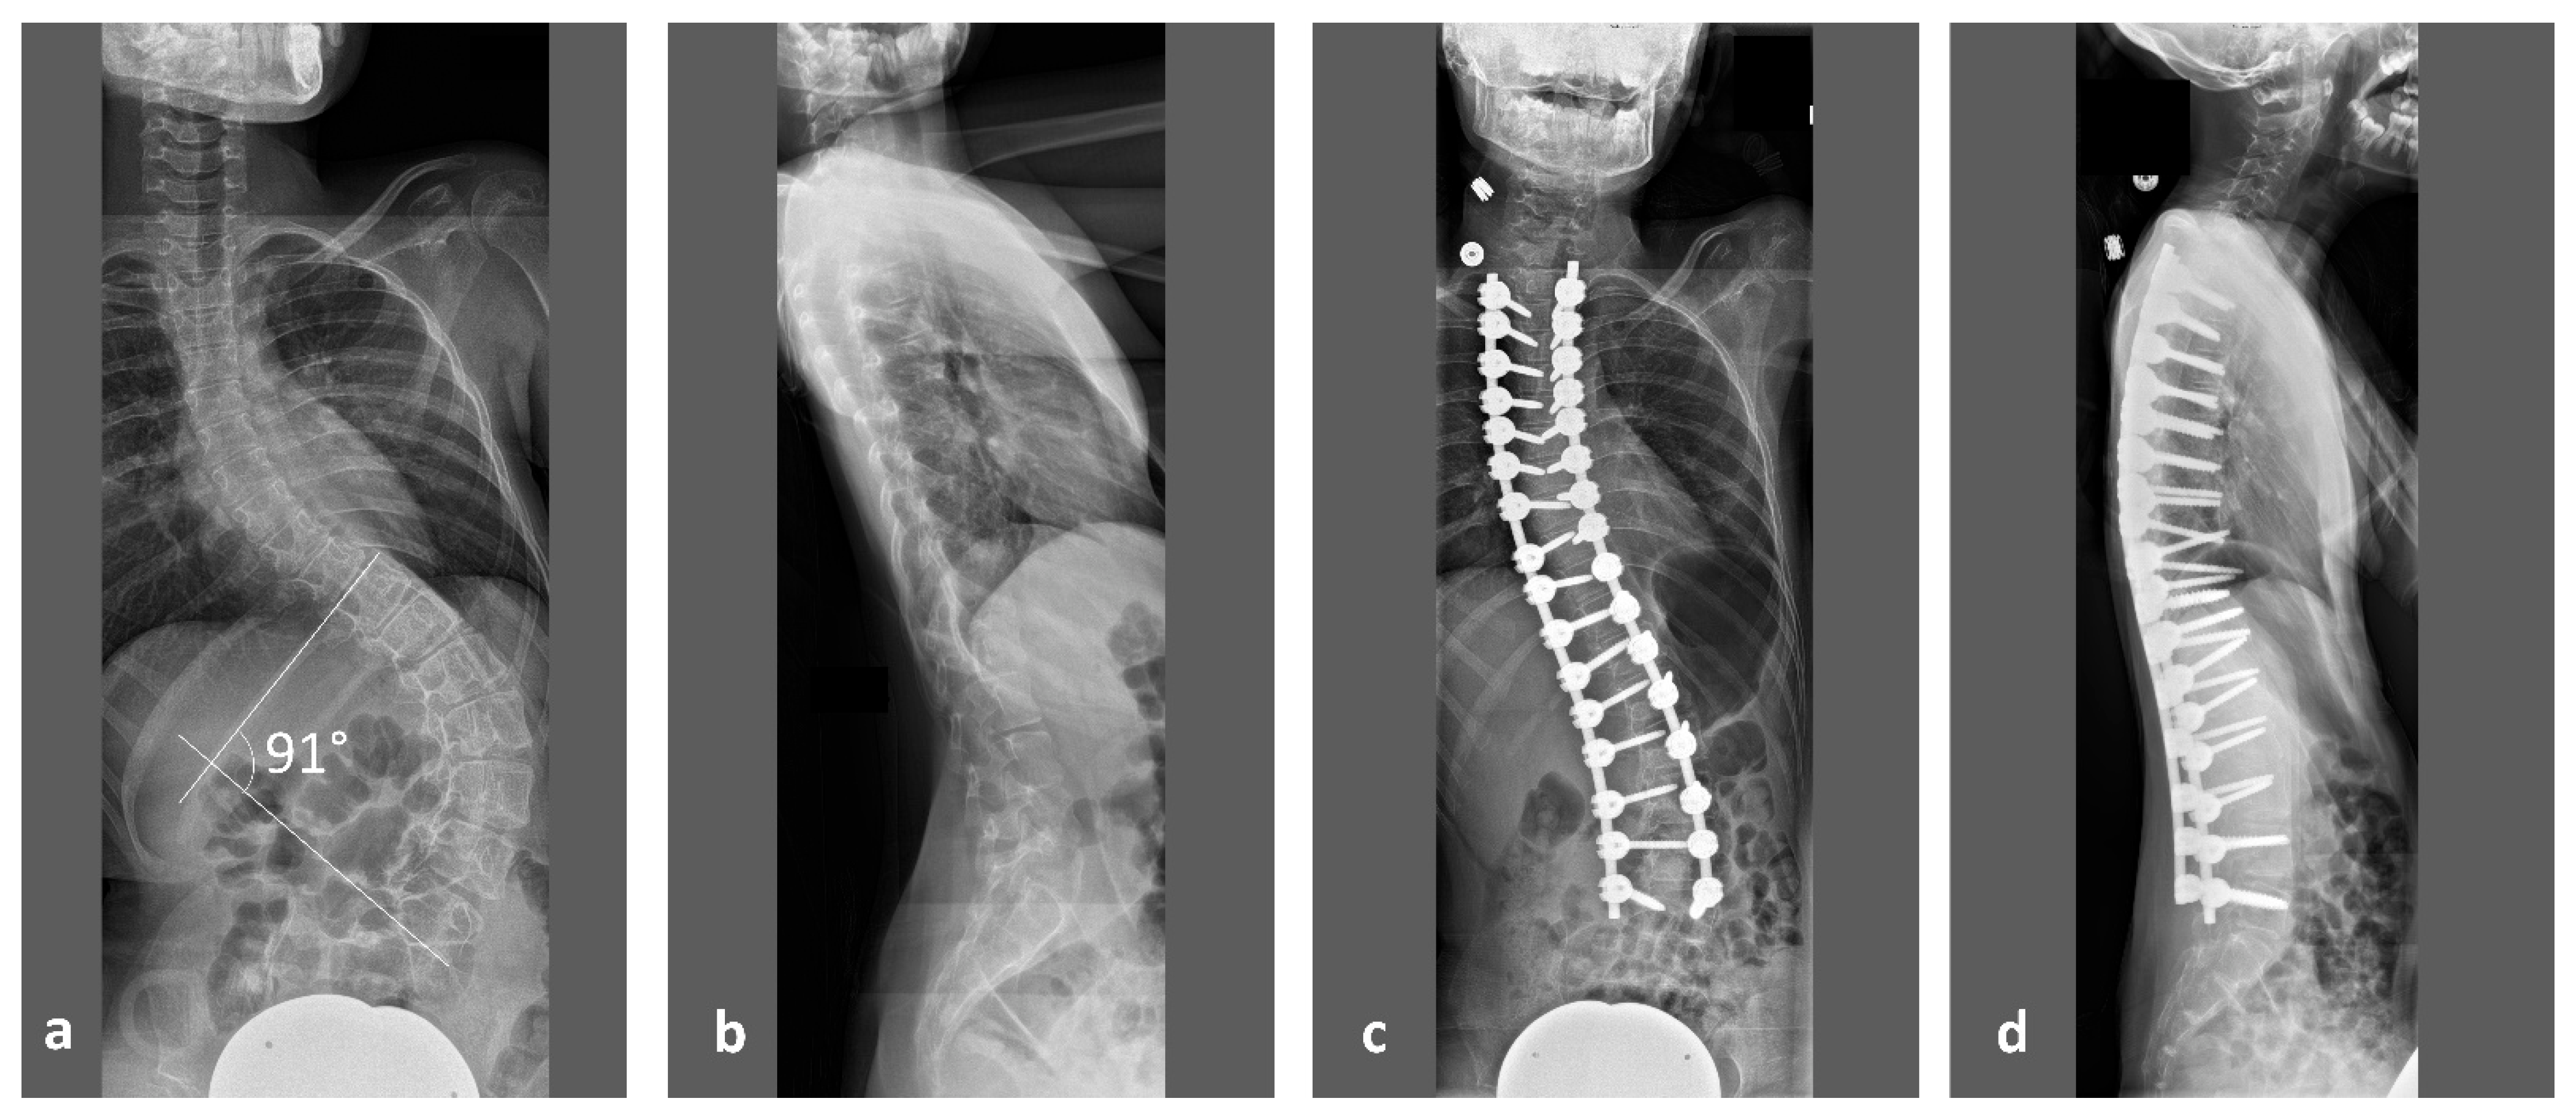 X ray dorso lumbar spine A/P and lateral views showing Kypho